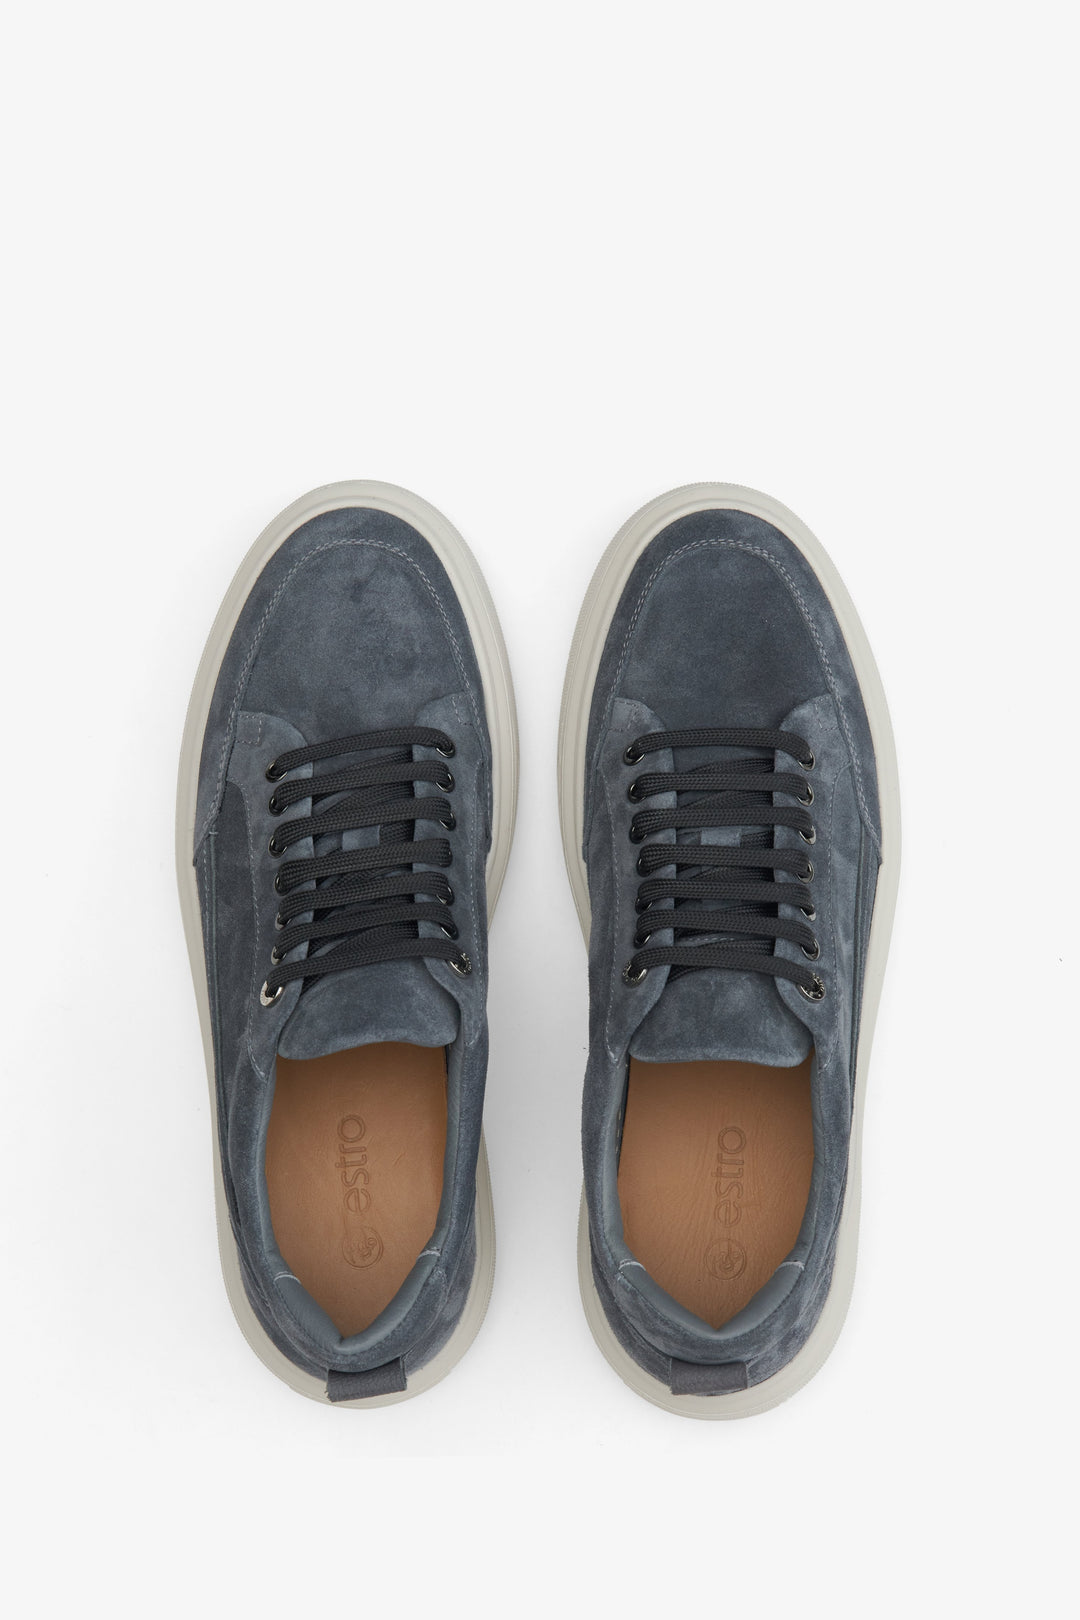 Men's velour sneakers with lacing in blue - presentation of the model from above.